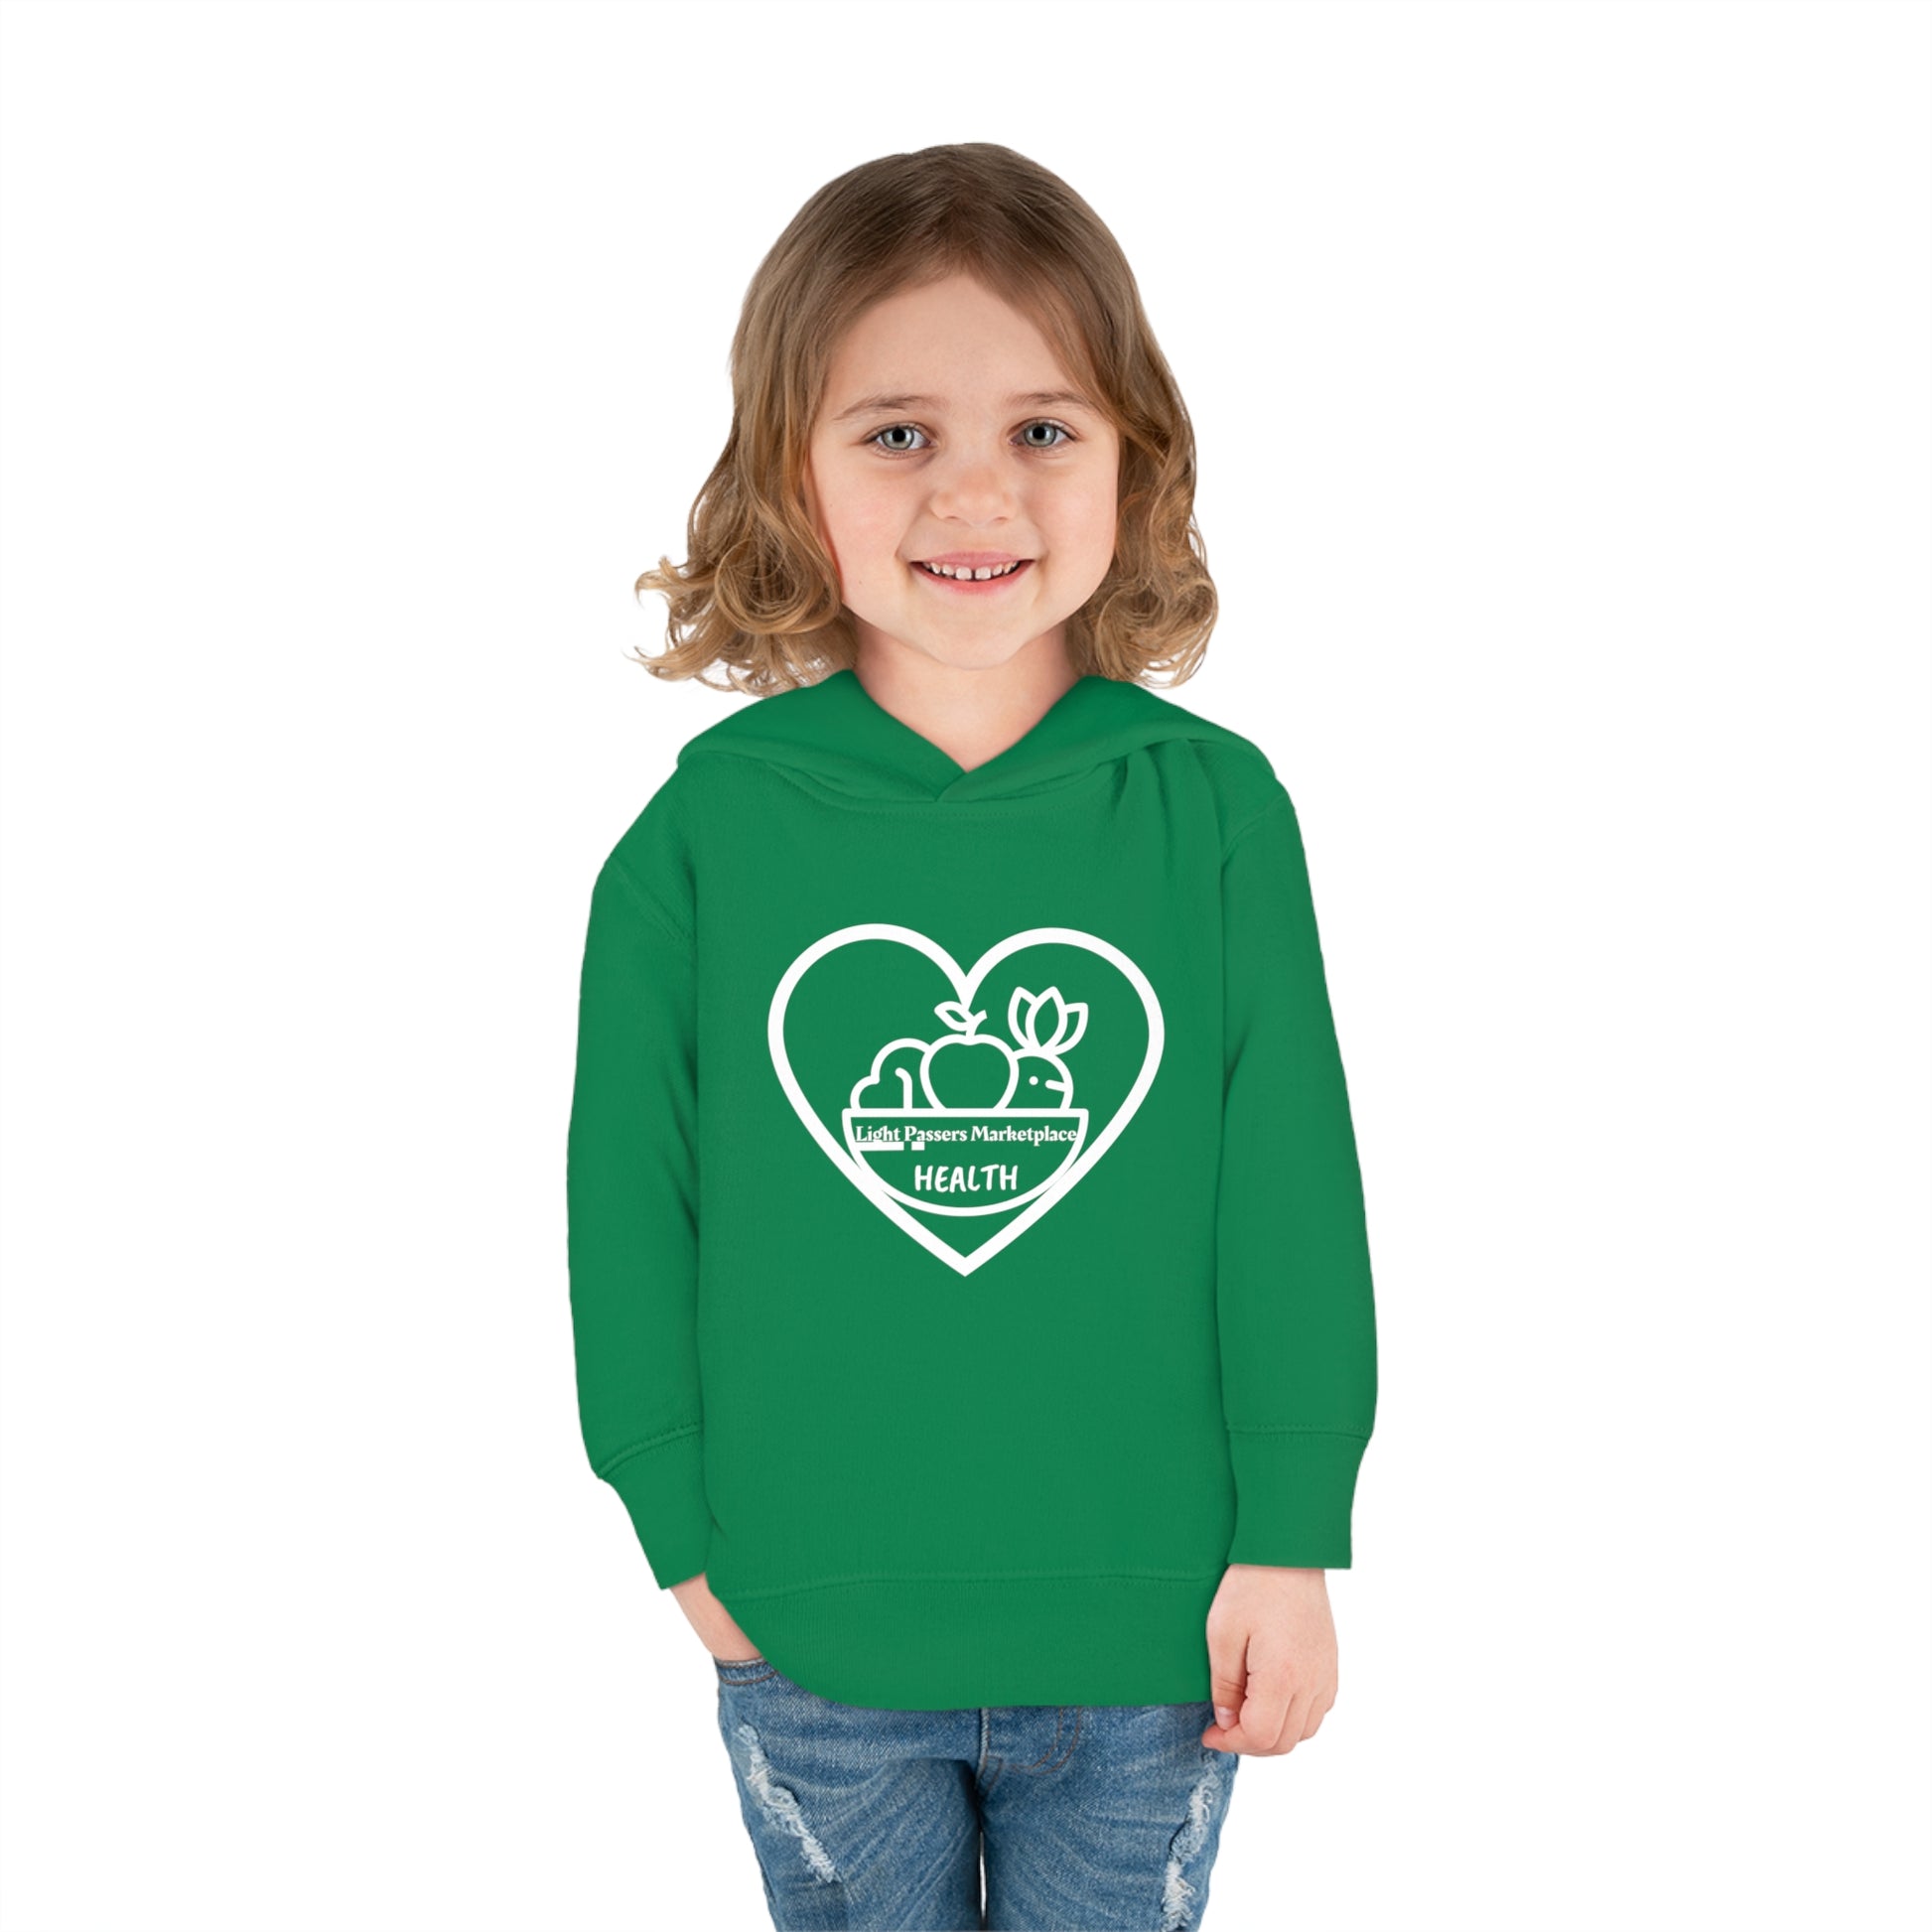 A toddler wearing a green Rabbit Skins hoodie, smiling at the camera. Features jersey-lined hood, cover-stitched details, side seam pockets, and durable 60% cotton, 40% polyester fabric for cozy wear.